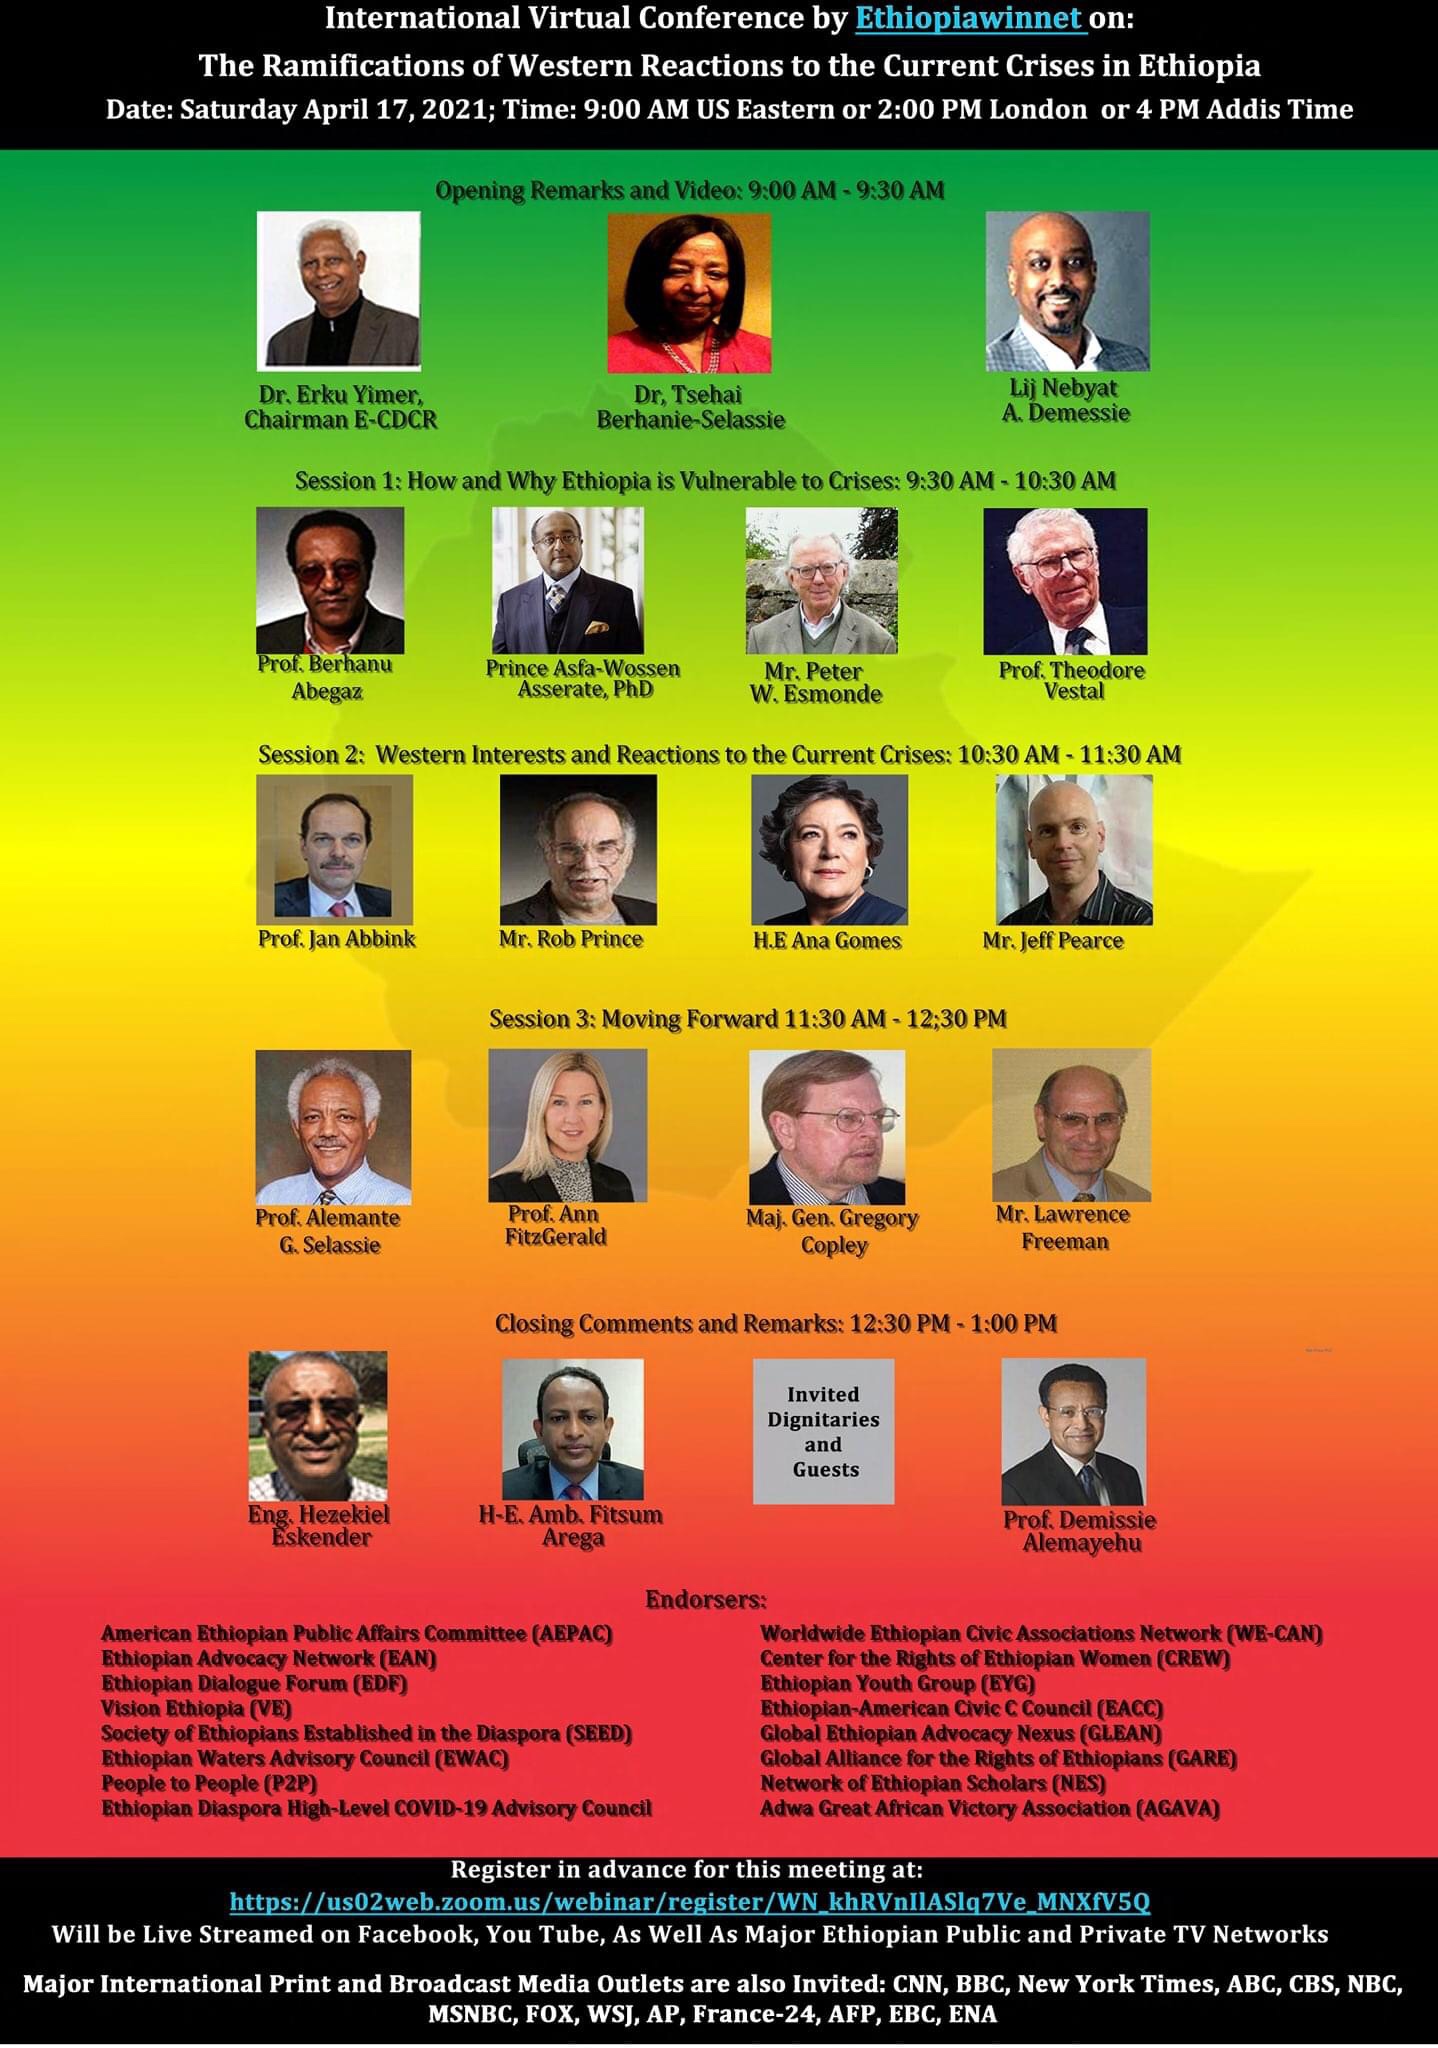 An International Virtual Conference On The Ramifications of Western Reactions to the Current Crises in Ethiopia